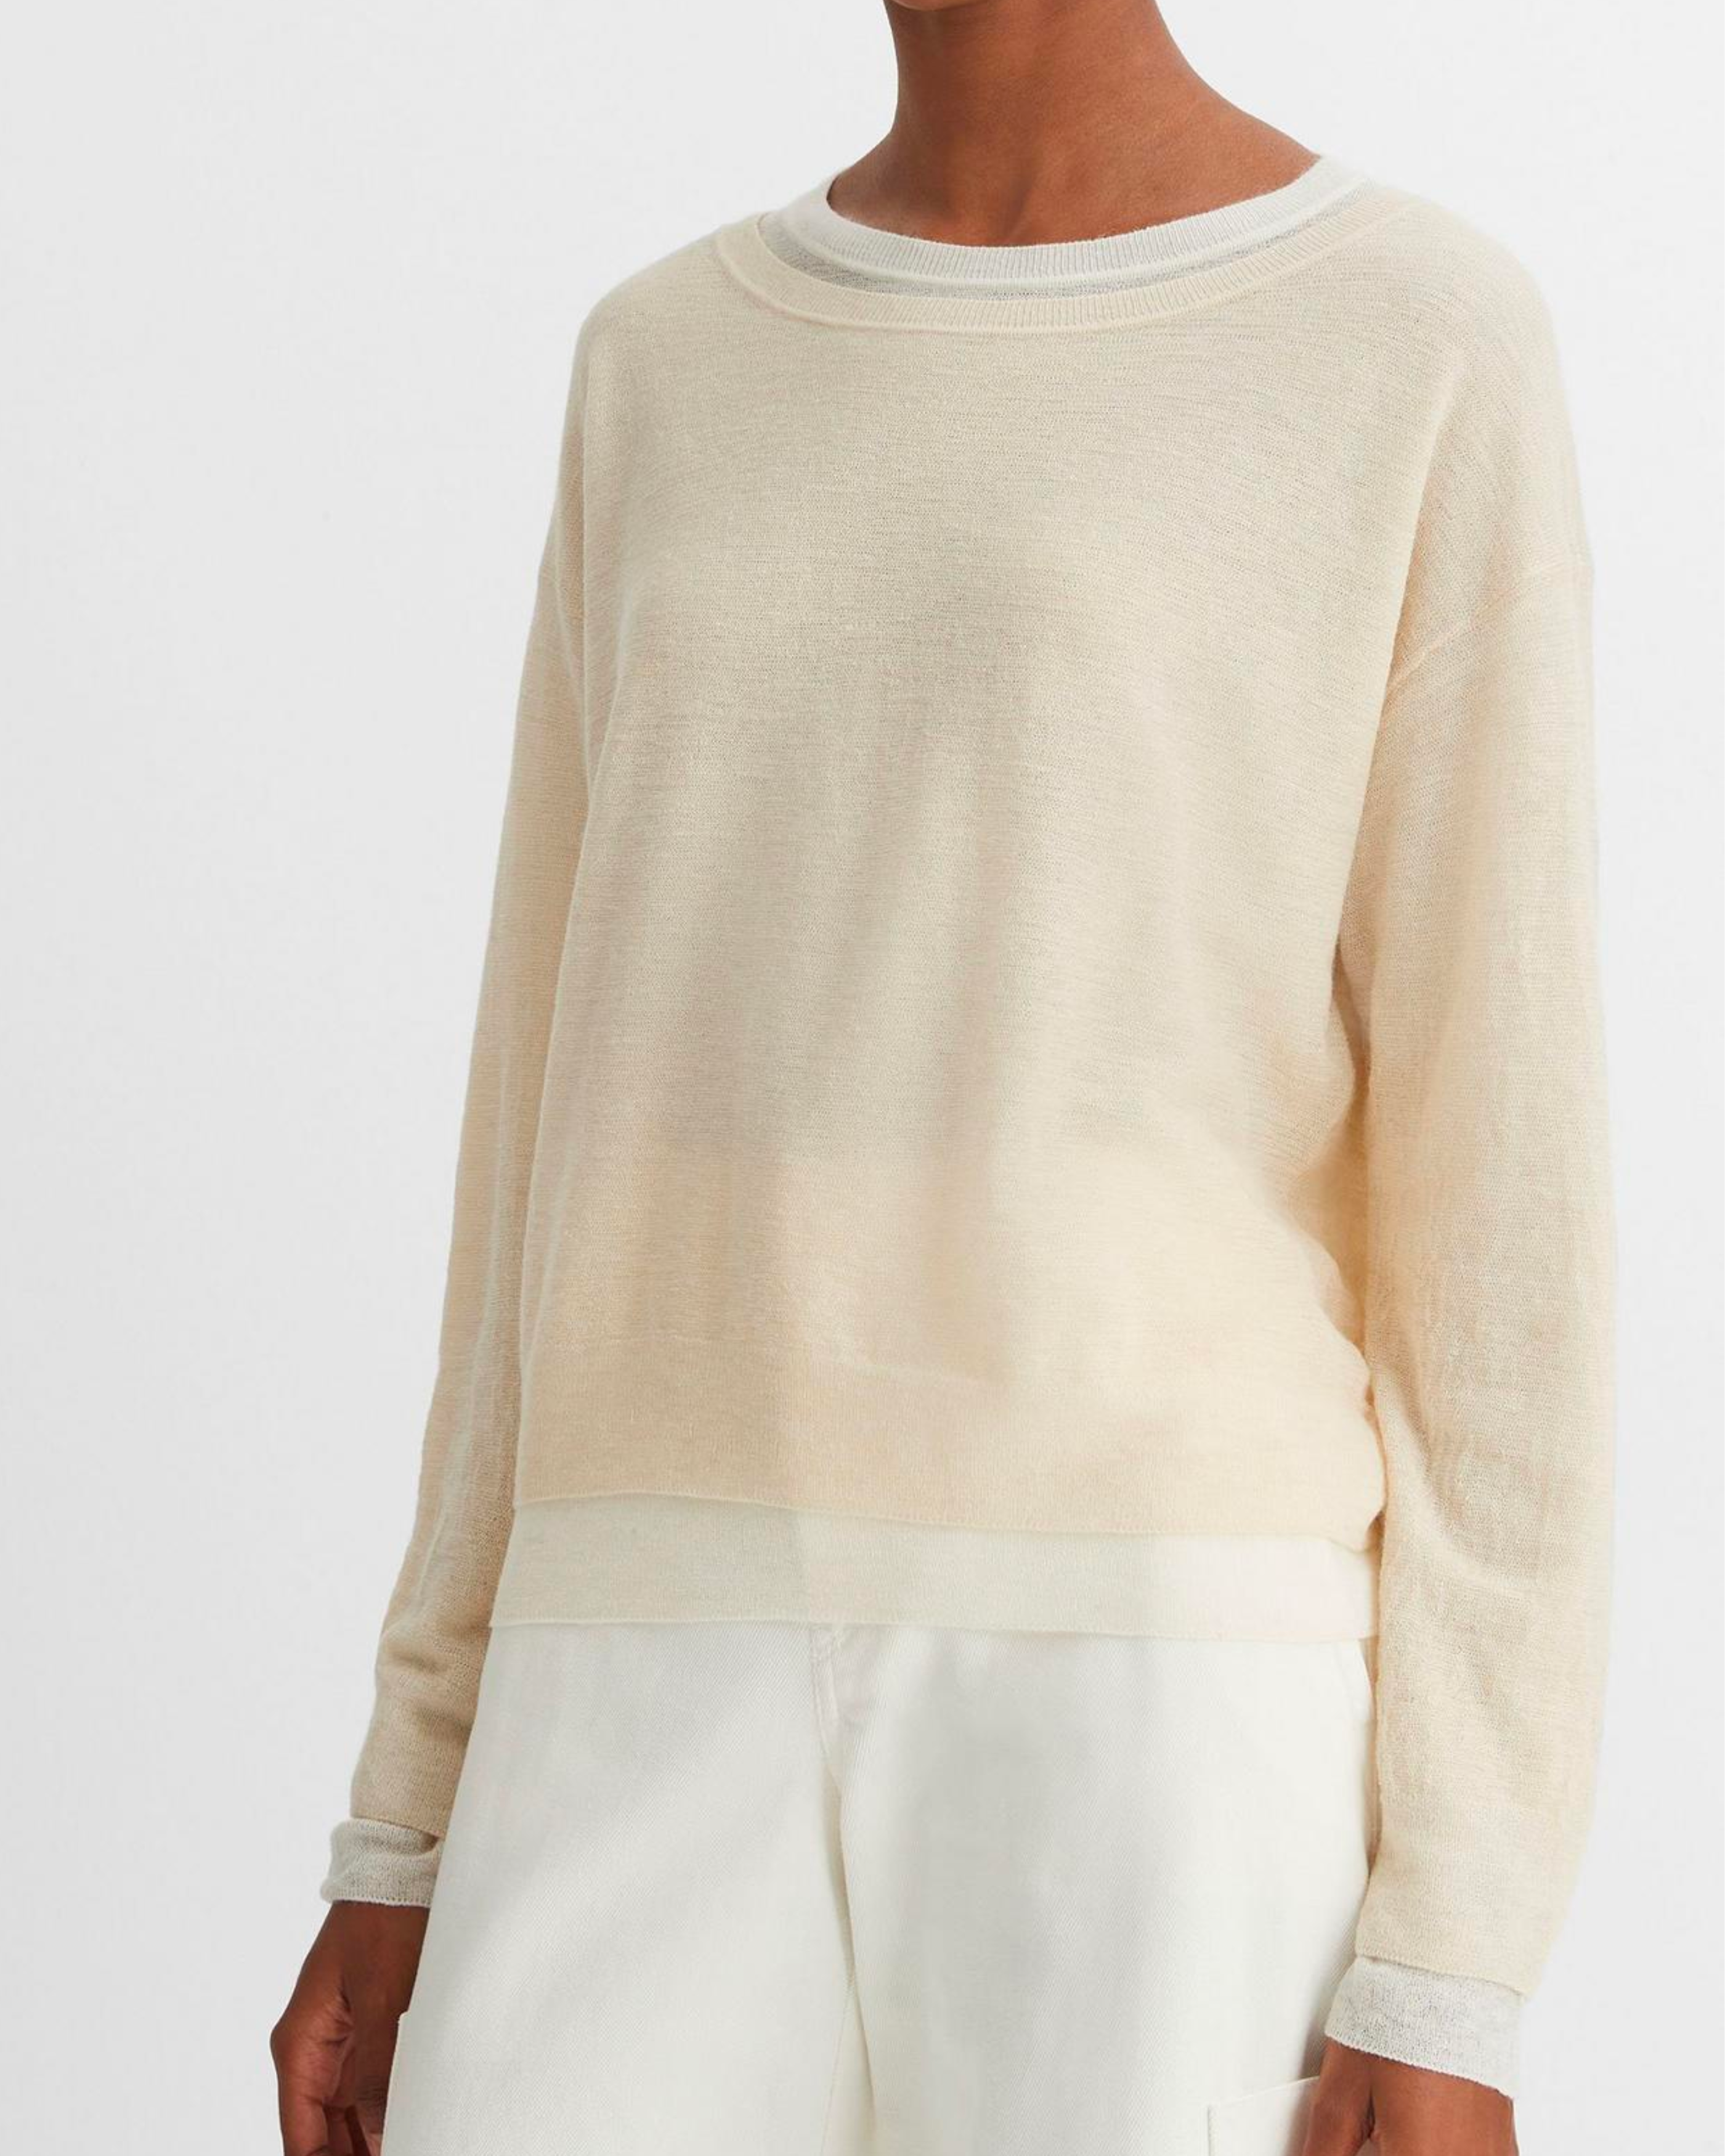 Vince Double Layer Sweater in White Sand